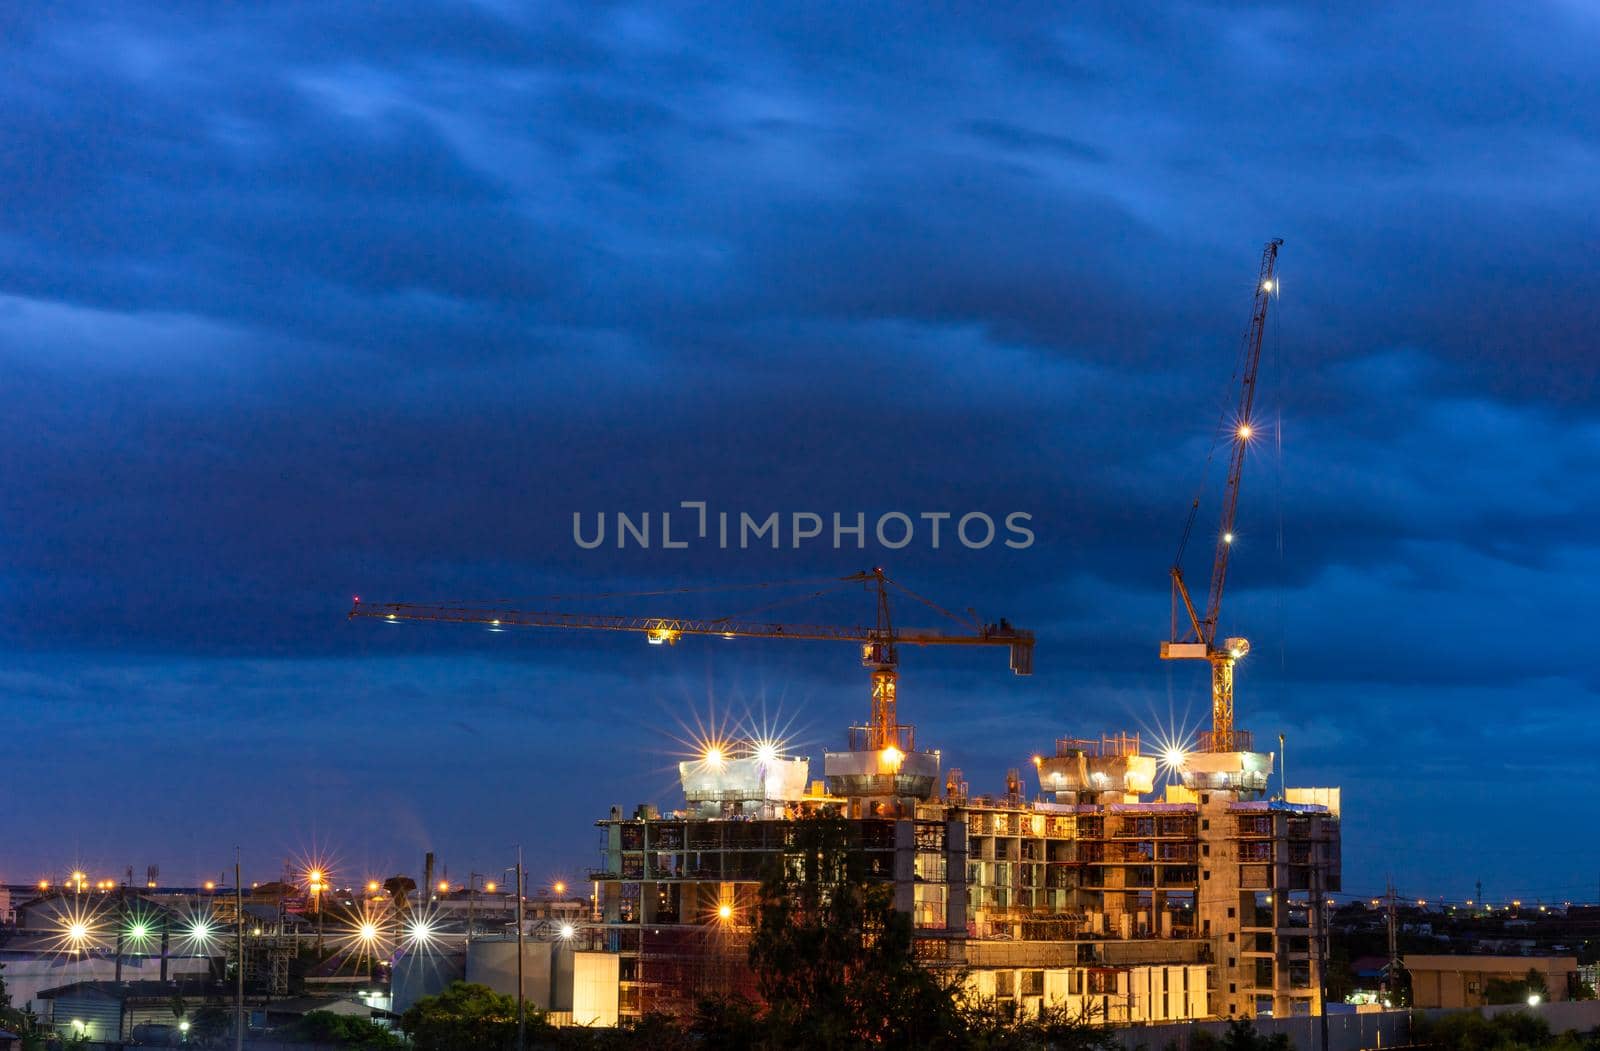 Construction site with cranes in cloudy night